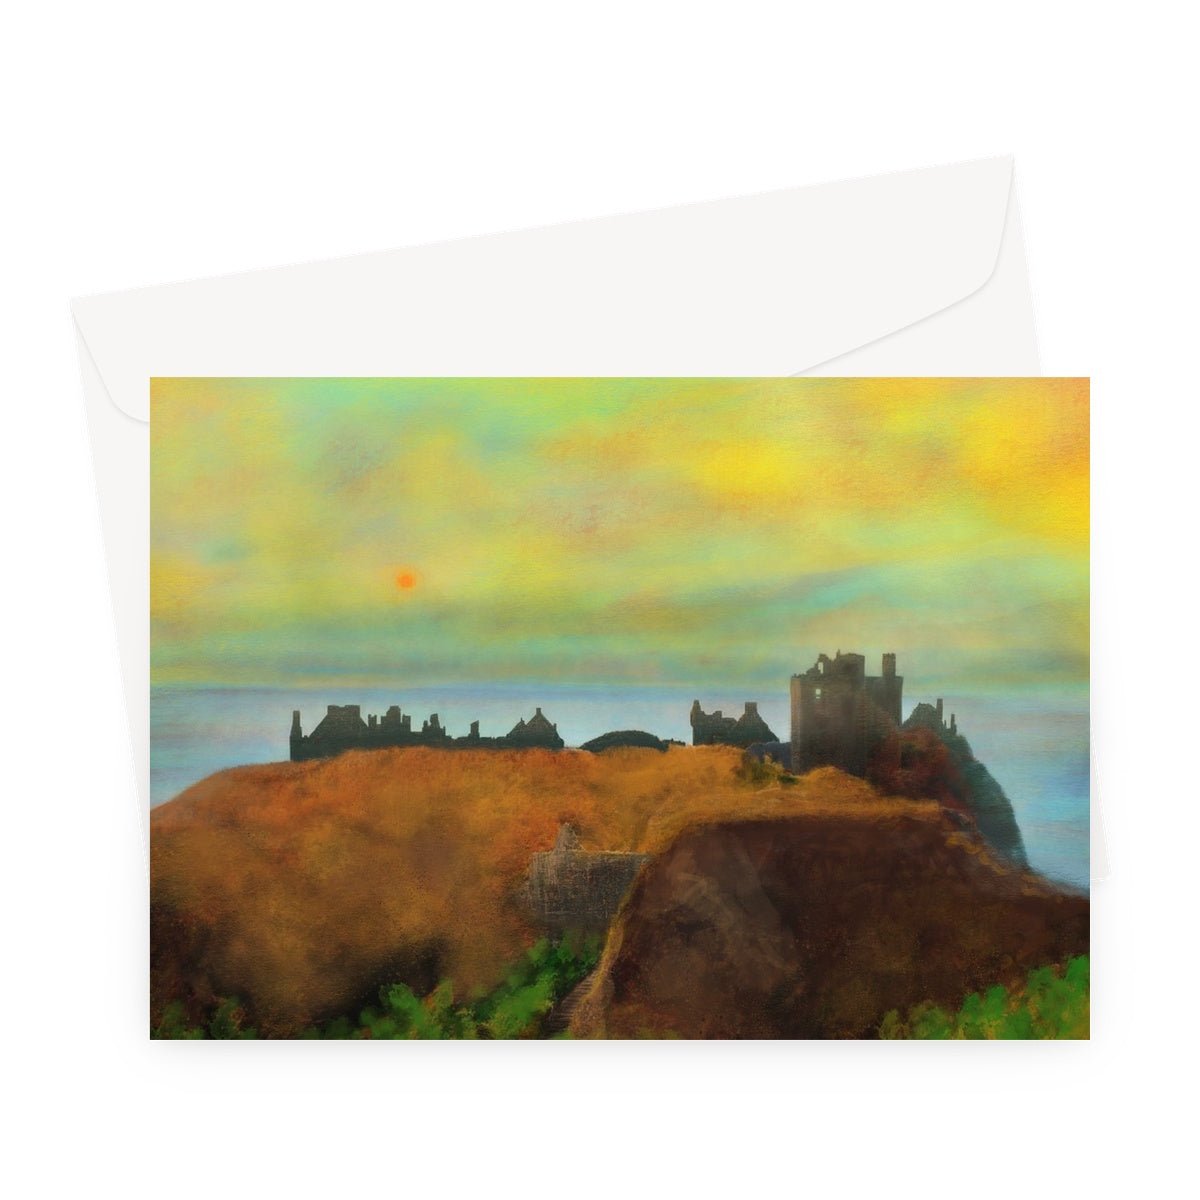 Dunnottar Castle Art Gifts Greeting Card-Greetings Cards-Scottish Castles Art Gallery-A5 Landscape-1 Card-Paintings, Prints, Homeware, Art Gifts From Scotland By Scottish Artist Kevin Hunter